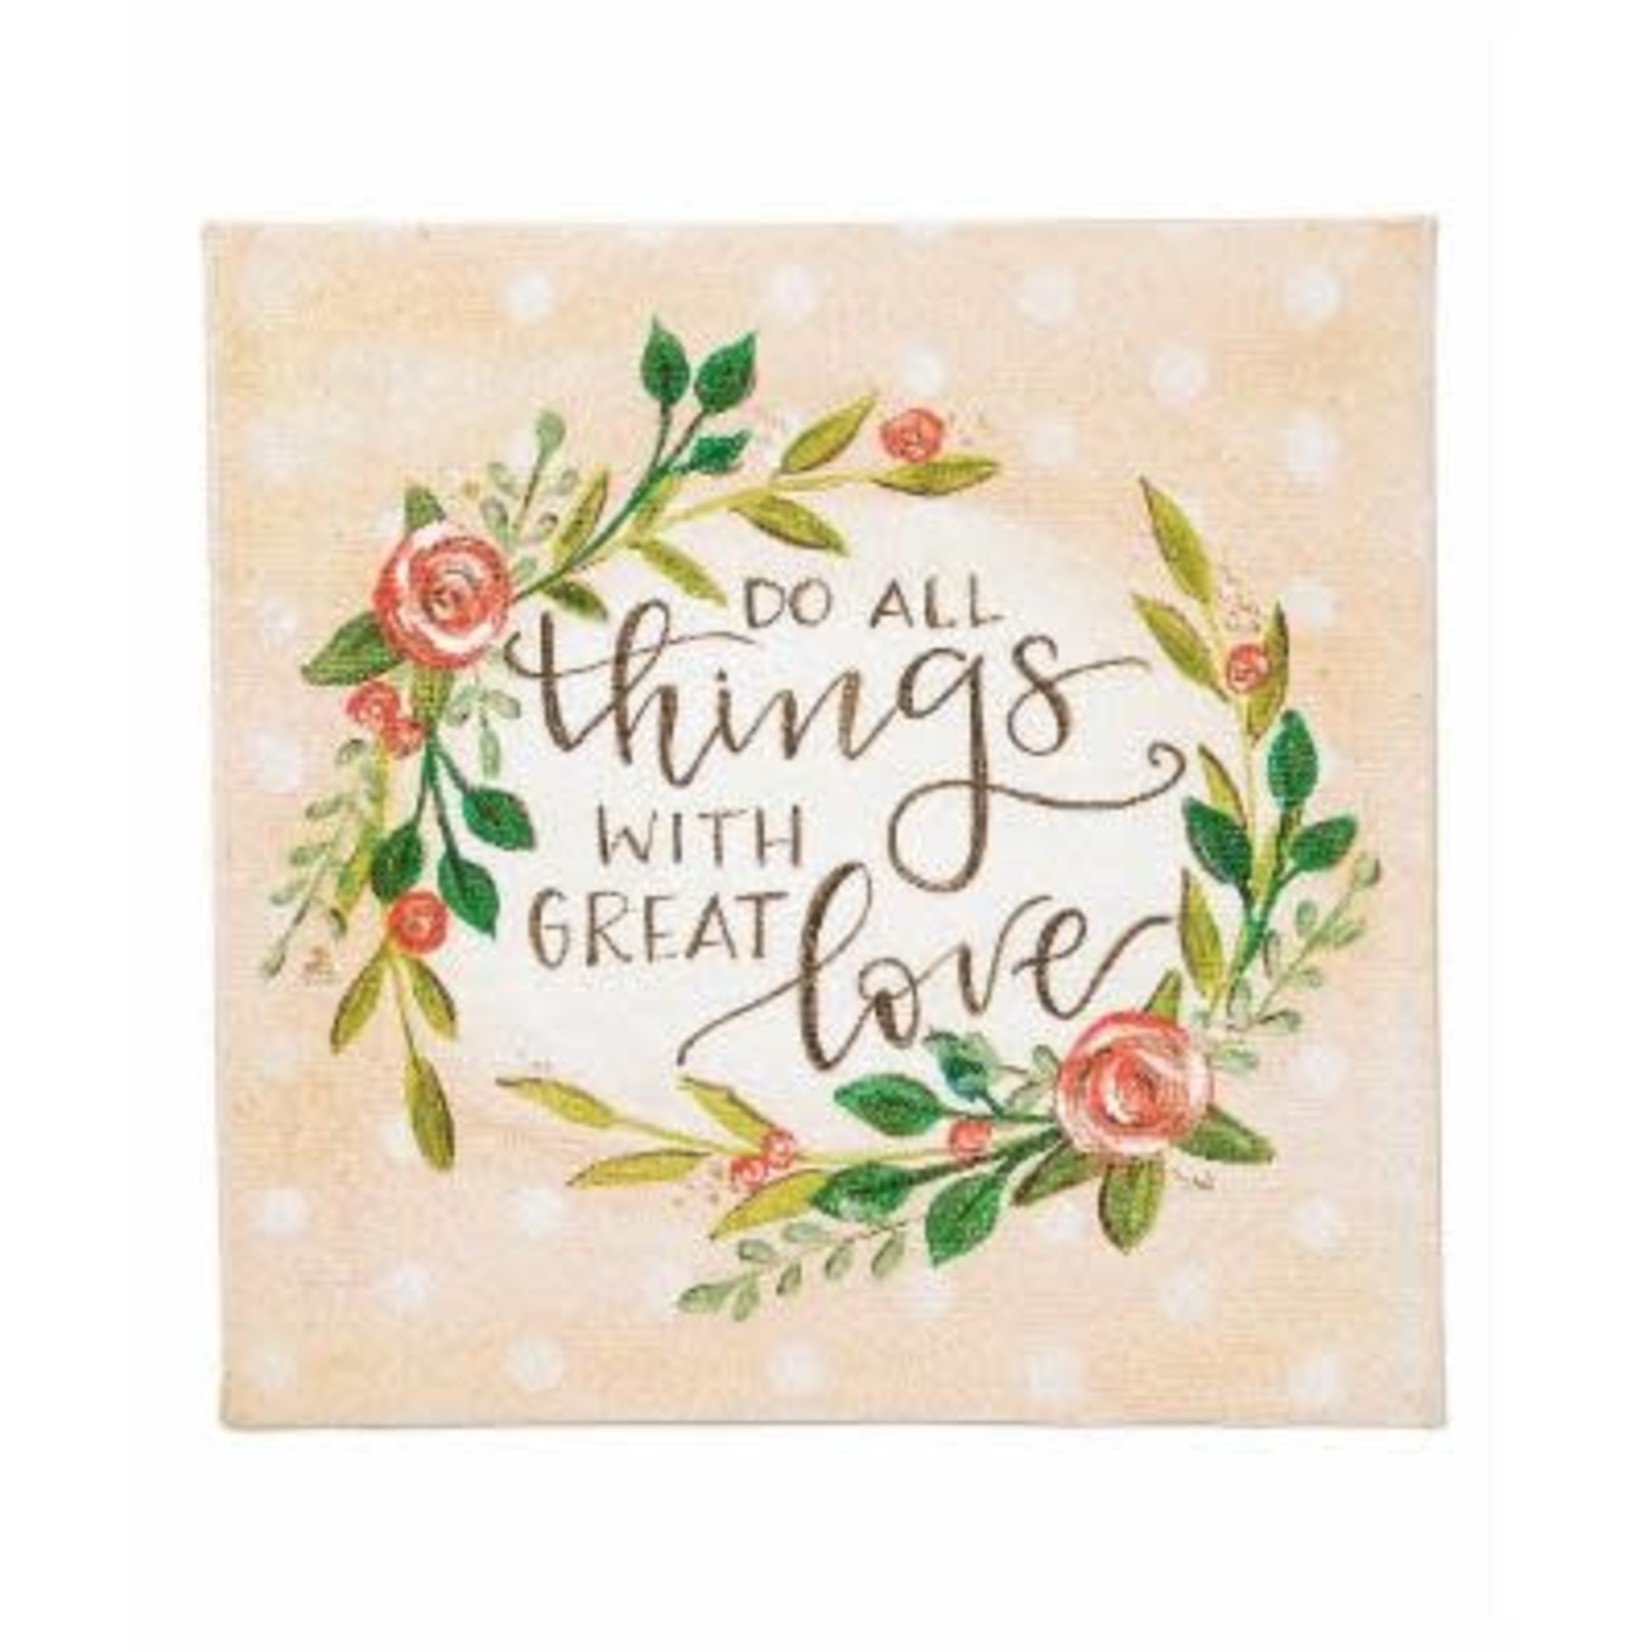 Great Love Canvas sign